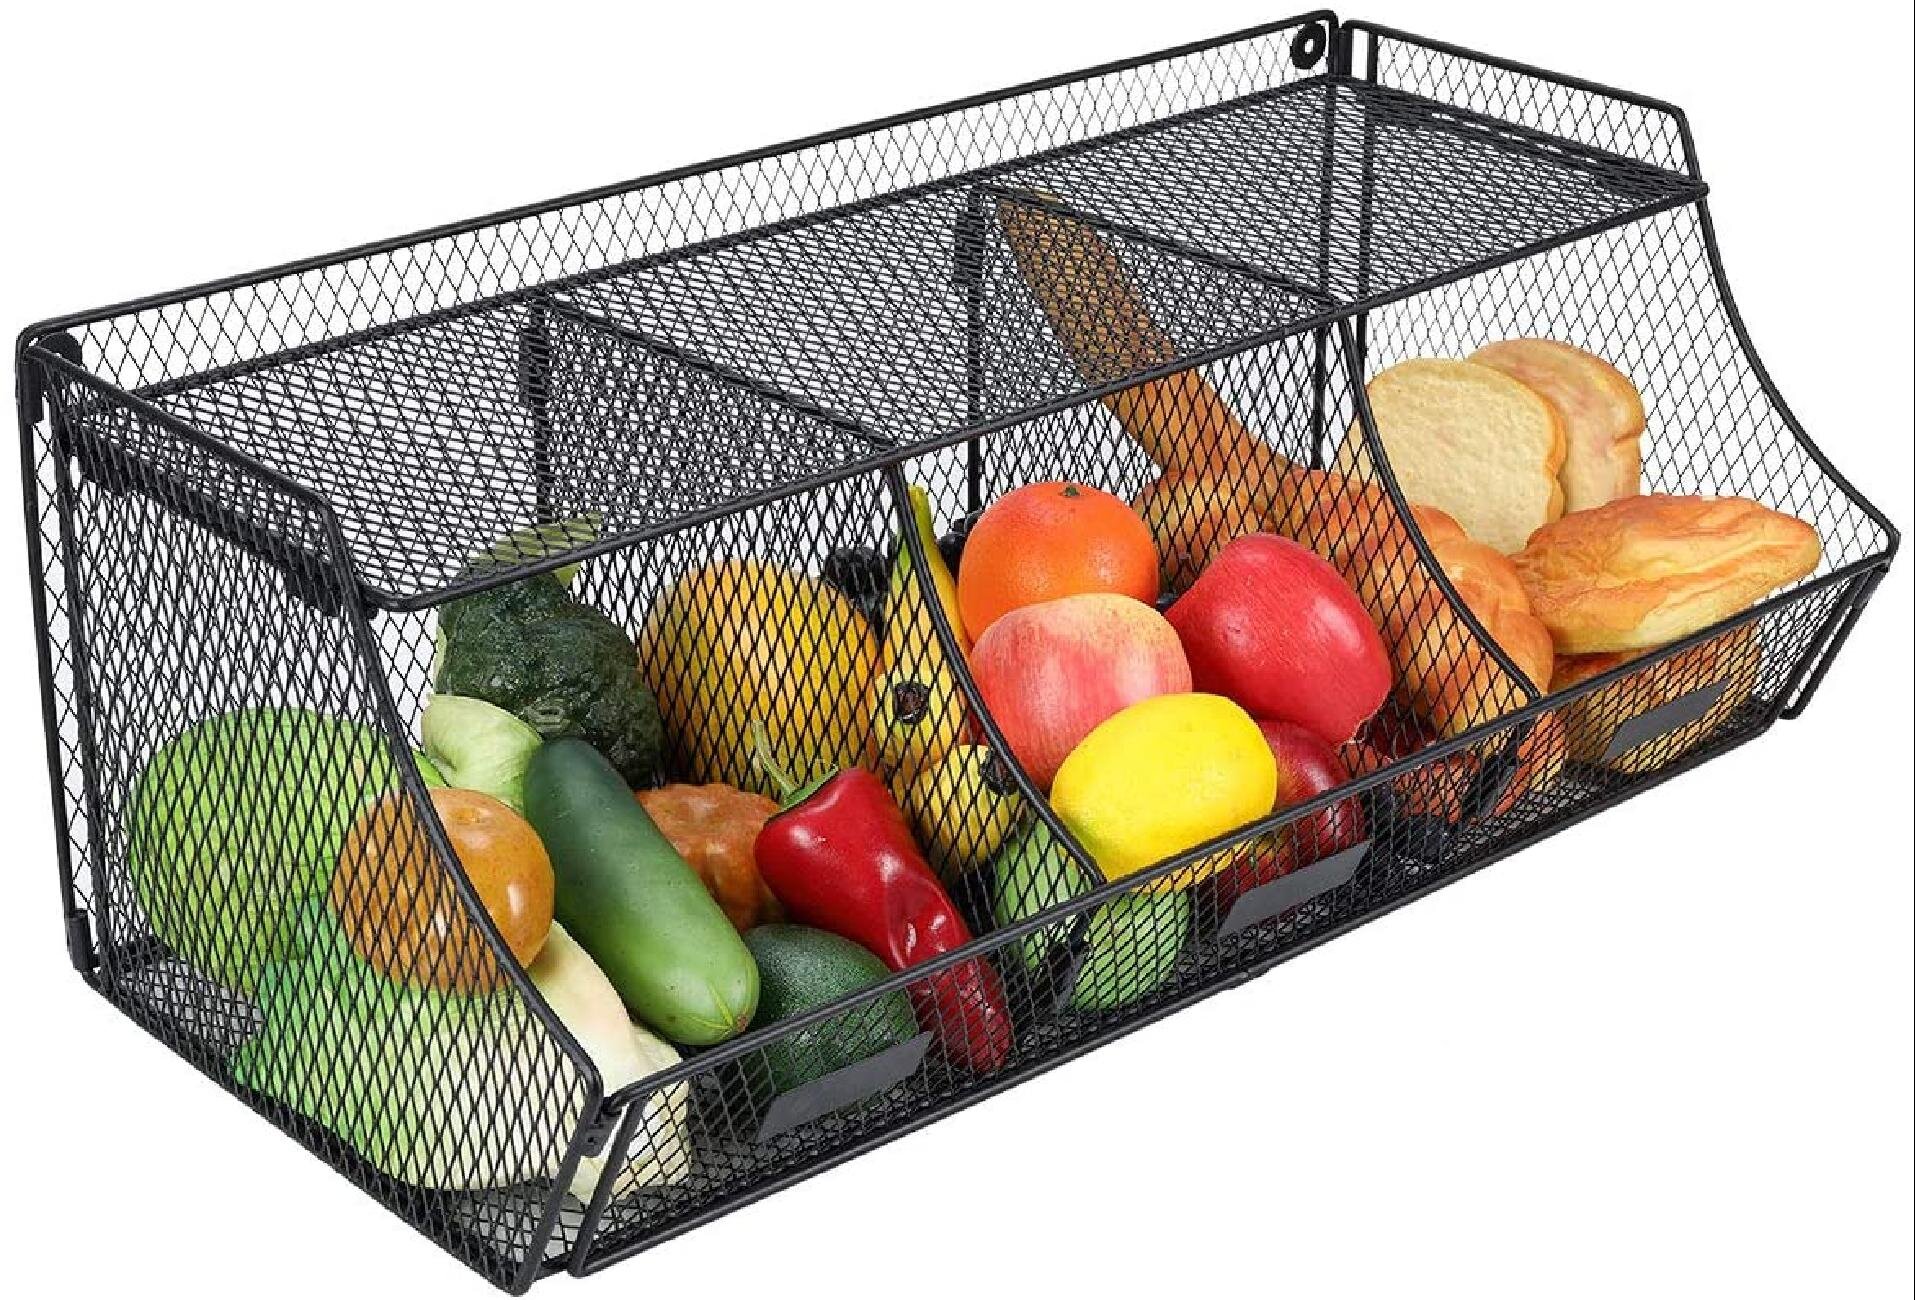 2 Pack-Black Wall-Mounted Black Metal Fruit Vegetable Baskets,Large /& Small Hanging Produce Bins,for Flowers,Fruits and Veggies,Decorations,and More,Set of 2 Black